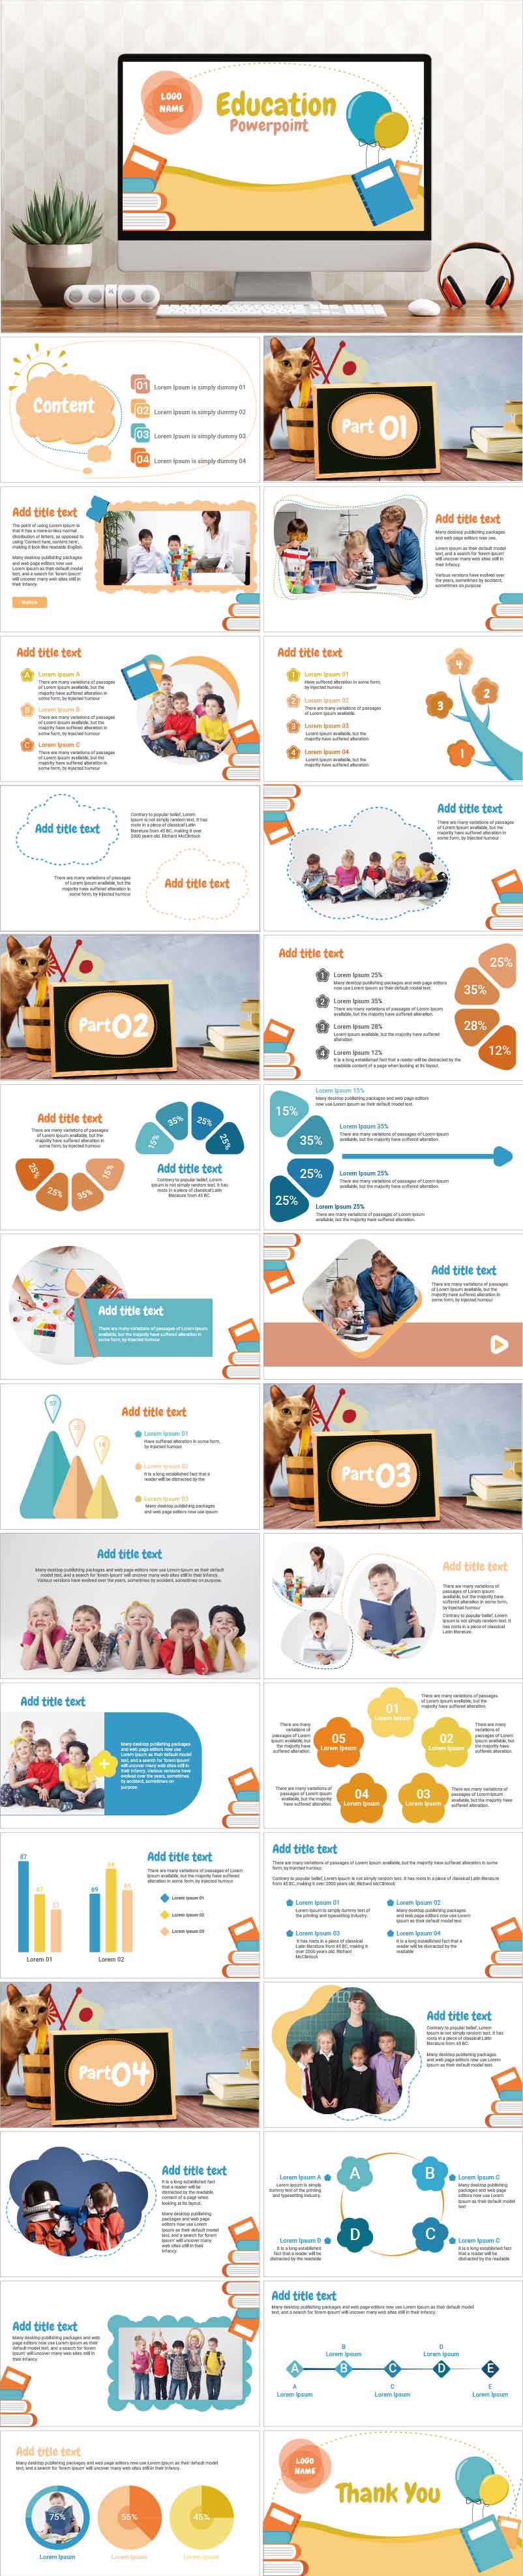 PowerPoint template vol.42